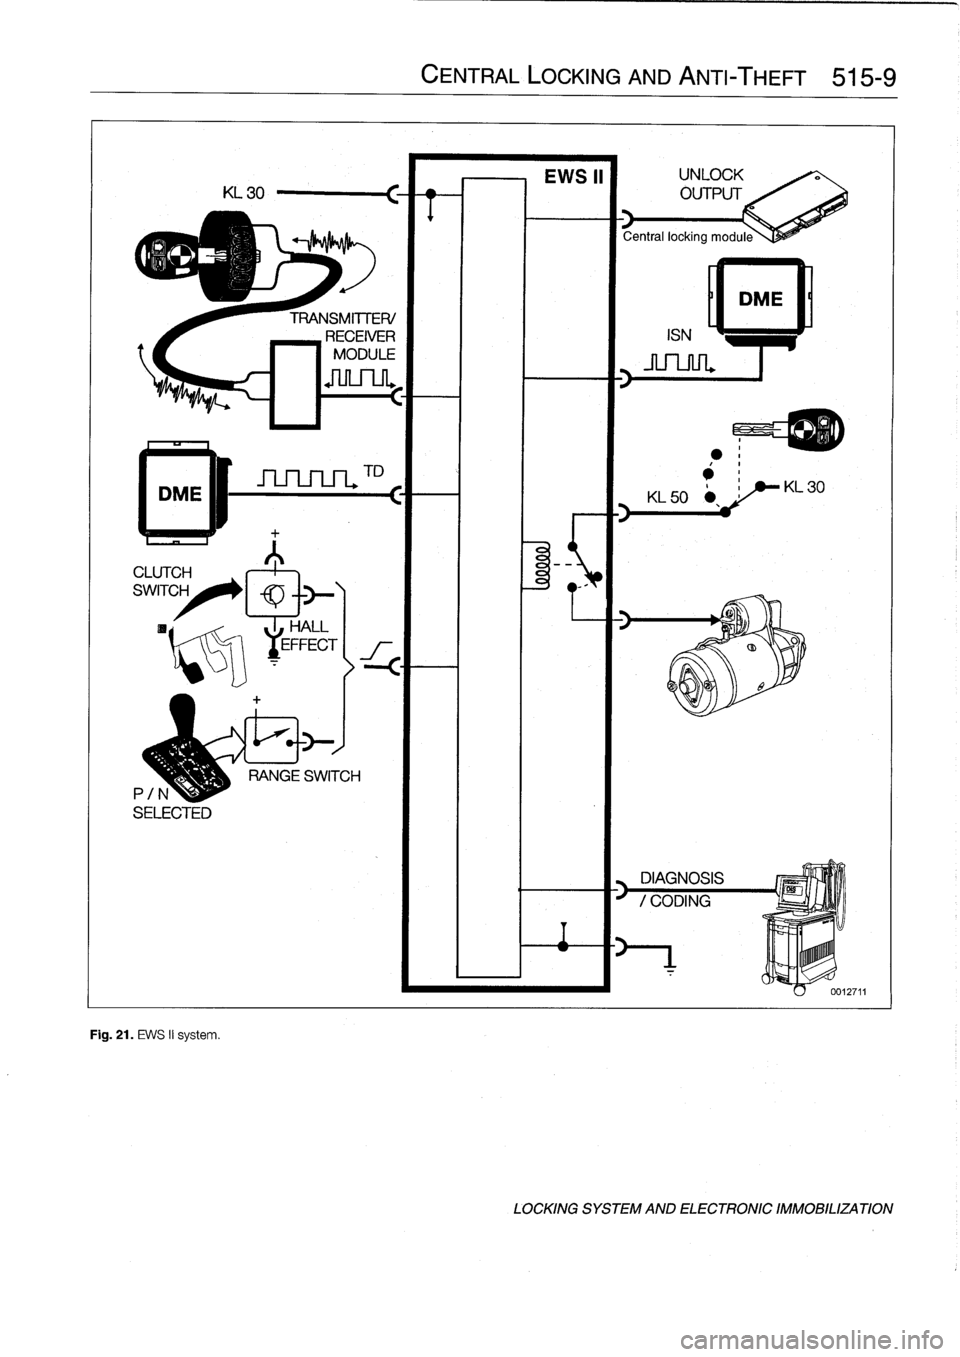 BMW M3 1993 E36 User Guide 
CLUTCH

SWITCH

Fig
.
21
.
EWS
II
system
.

TRANSMITTER/

RECEIVER

`I
MODULE

HALL

y
EFFECT

TD

CENTRAL
LOCKING
AND
ANTI-THEFT

	

515-9

DME

DIAGNOSIS

"
D
`
mol
111

IIIIIIIII

.r

LOCKING
SYST